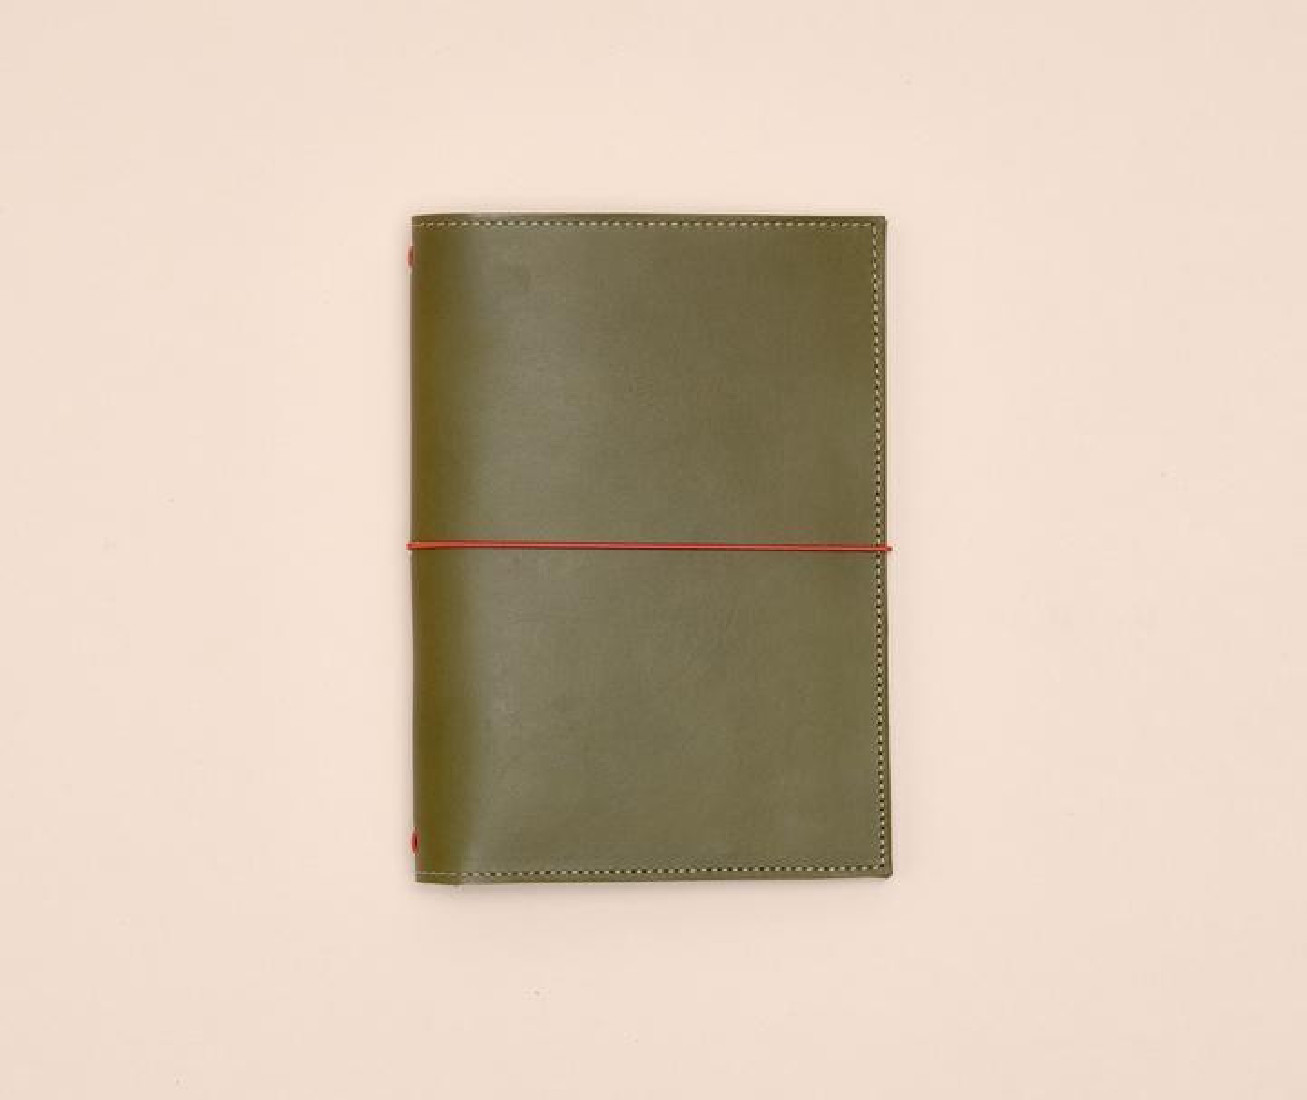 Paper Republic grand voyageur A6  olive green leather journal